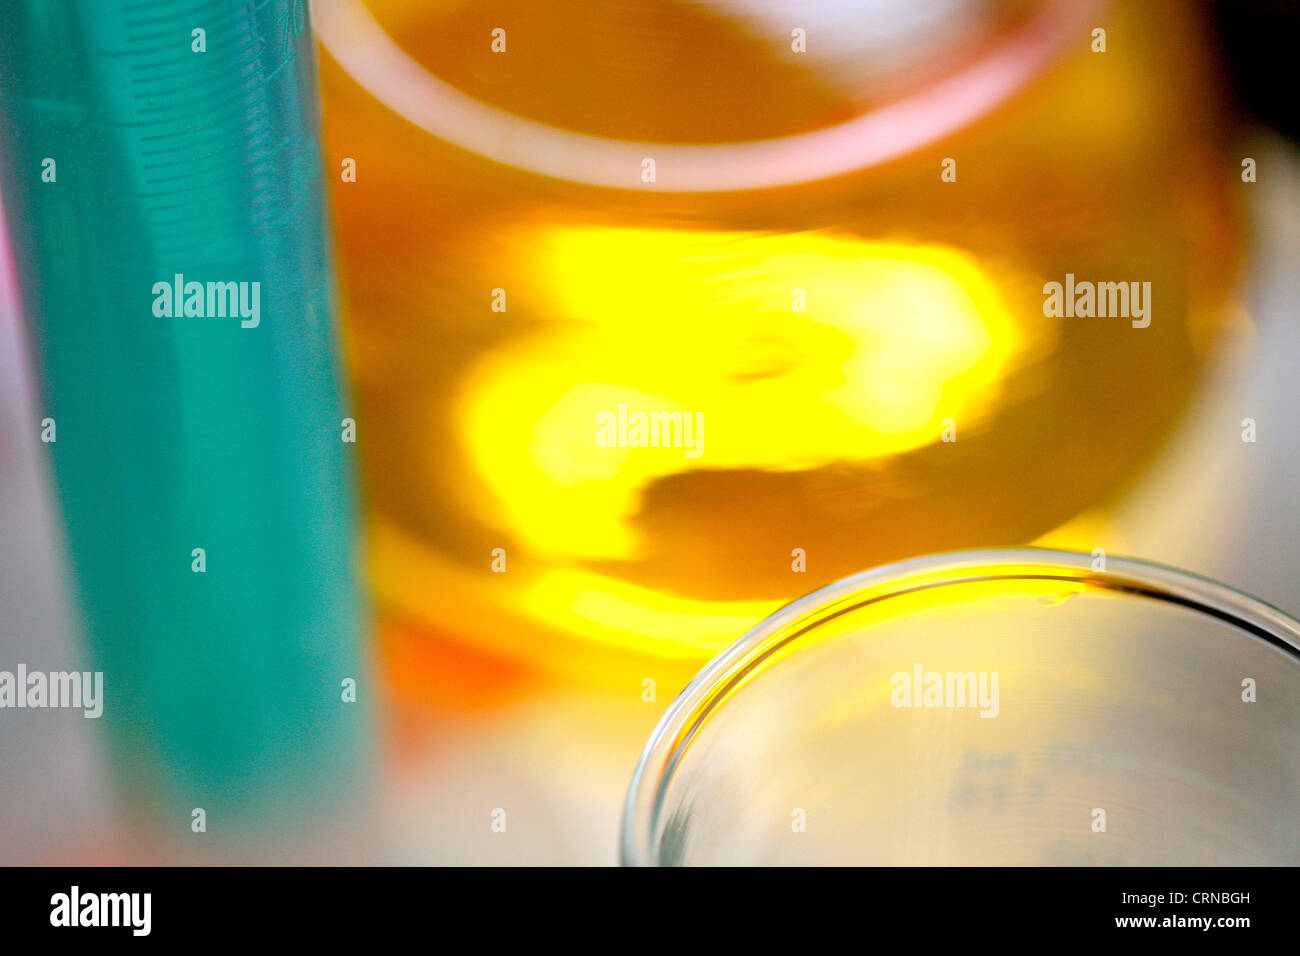 An impressionistic still life showing laboratory equipment. Stock Photo